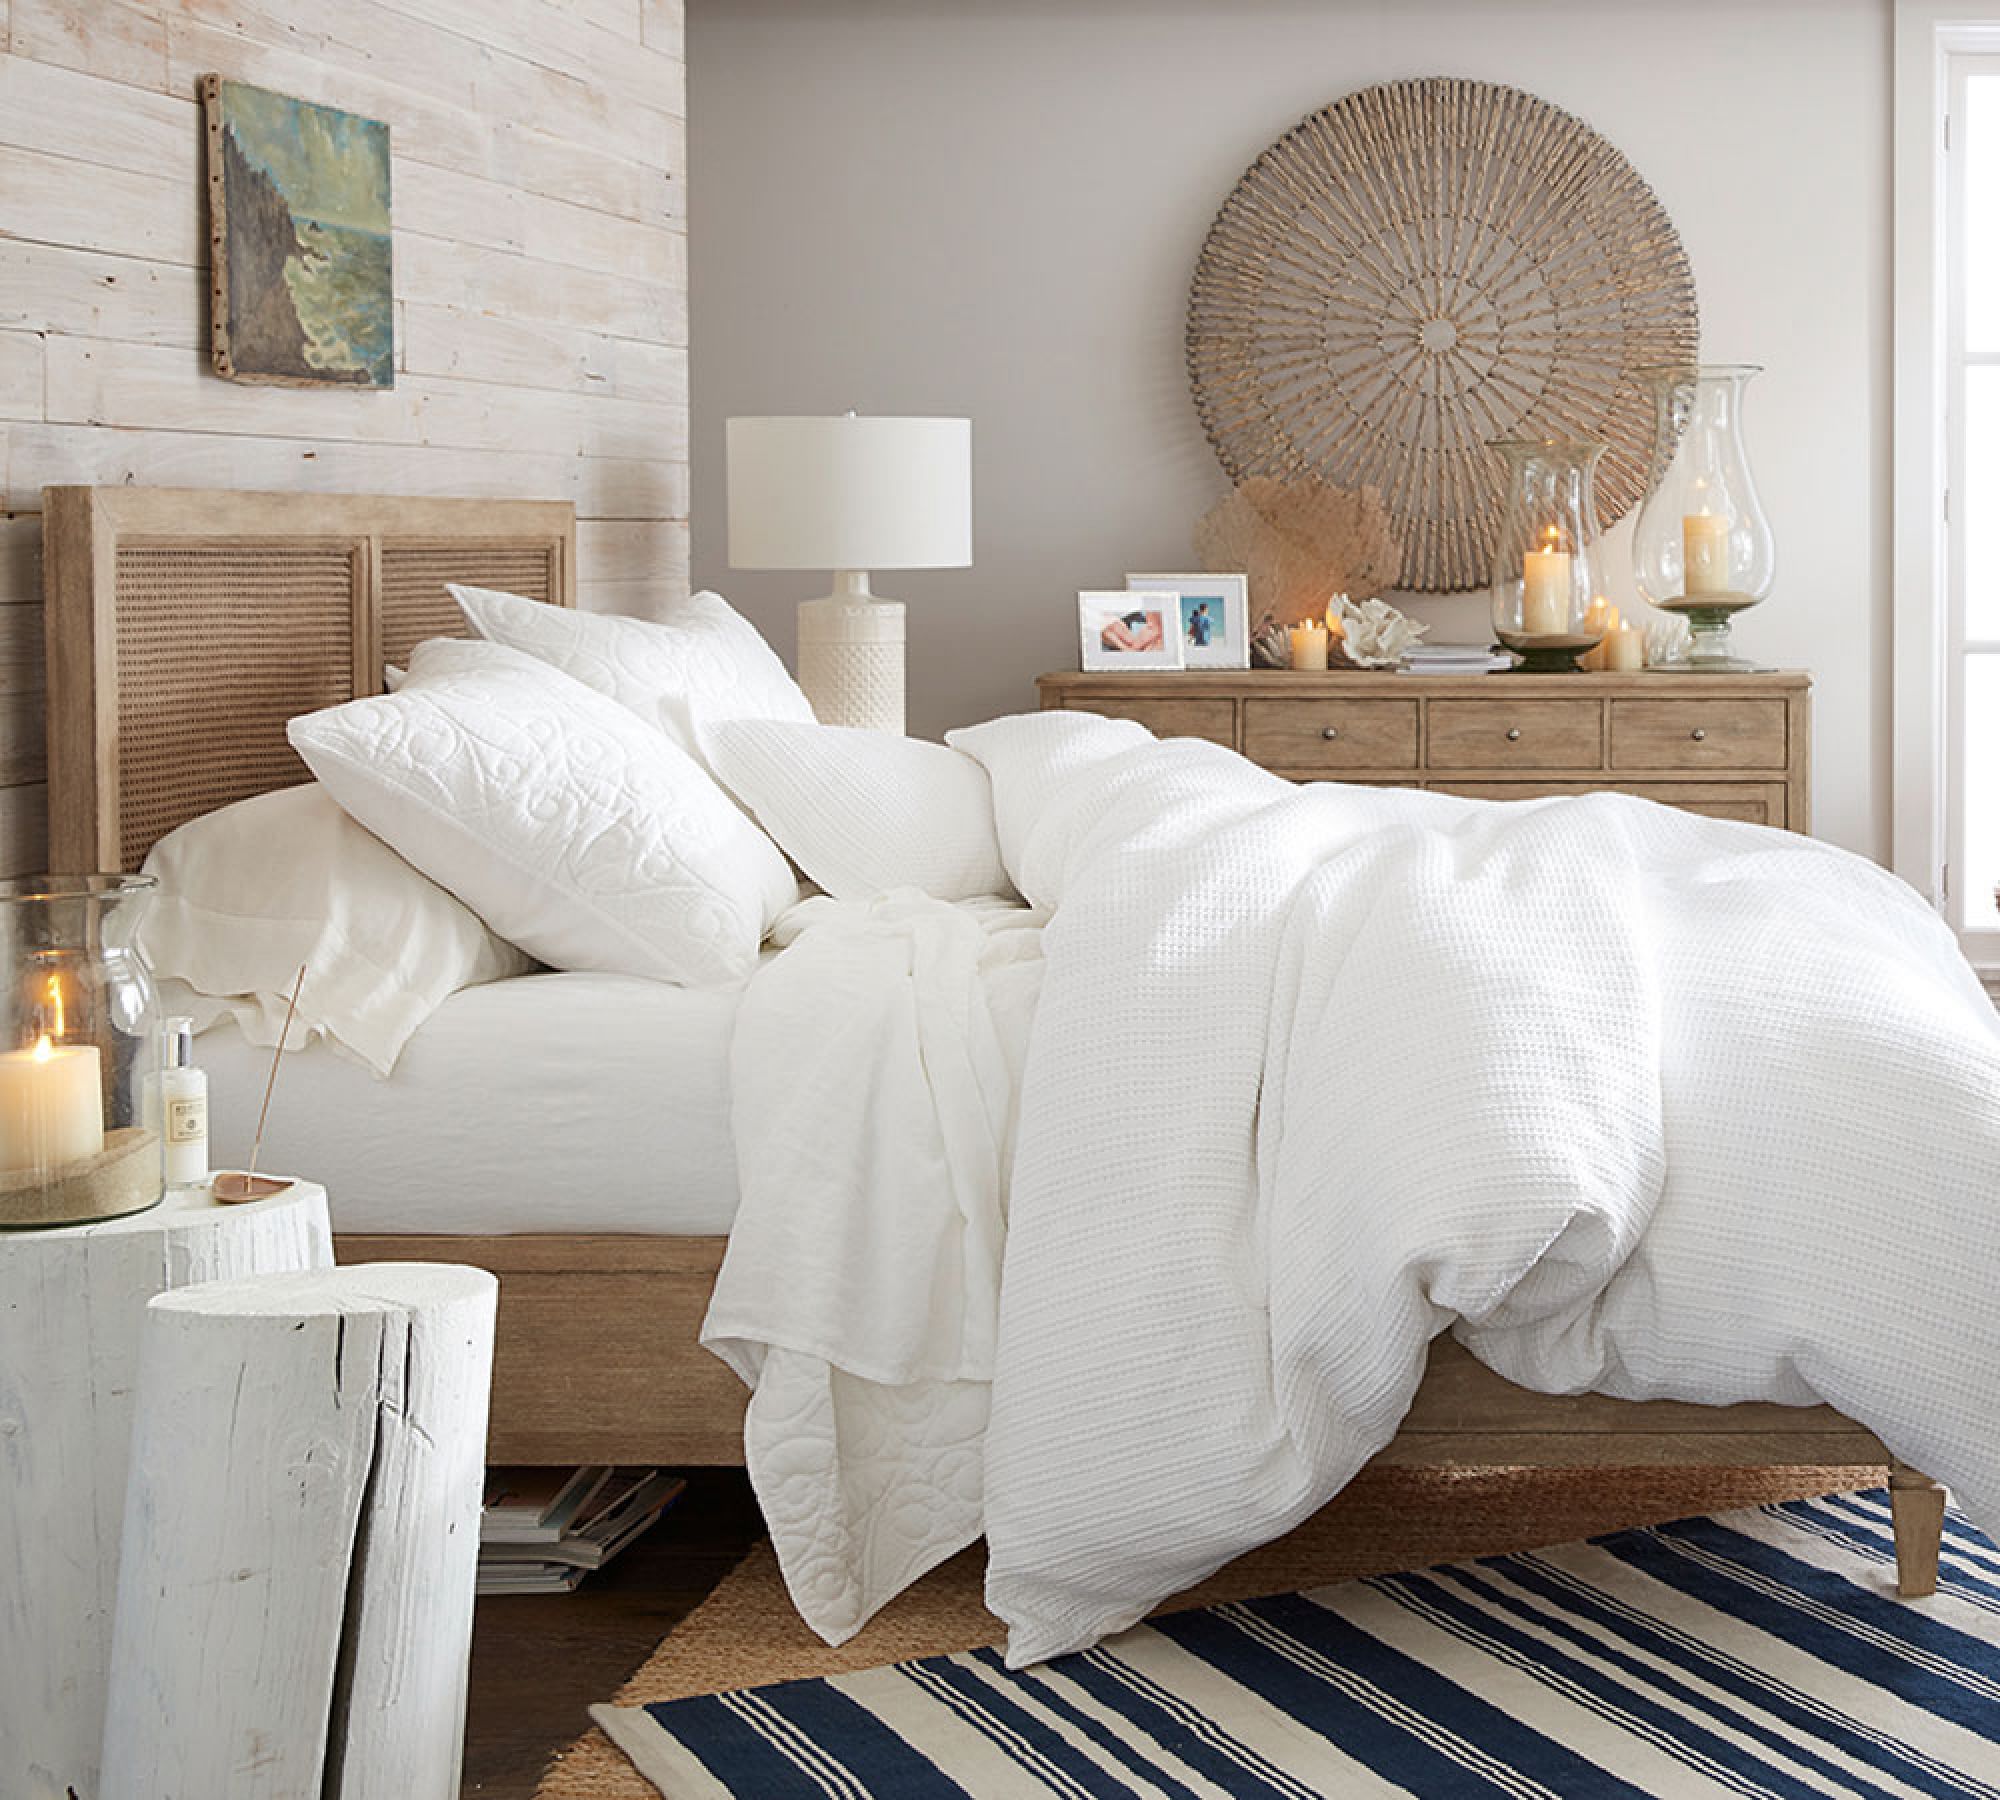 all white bedding in a boho bedroom